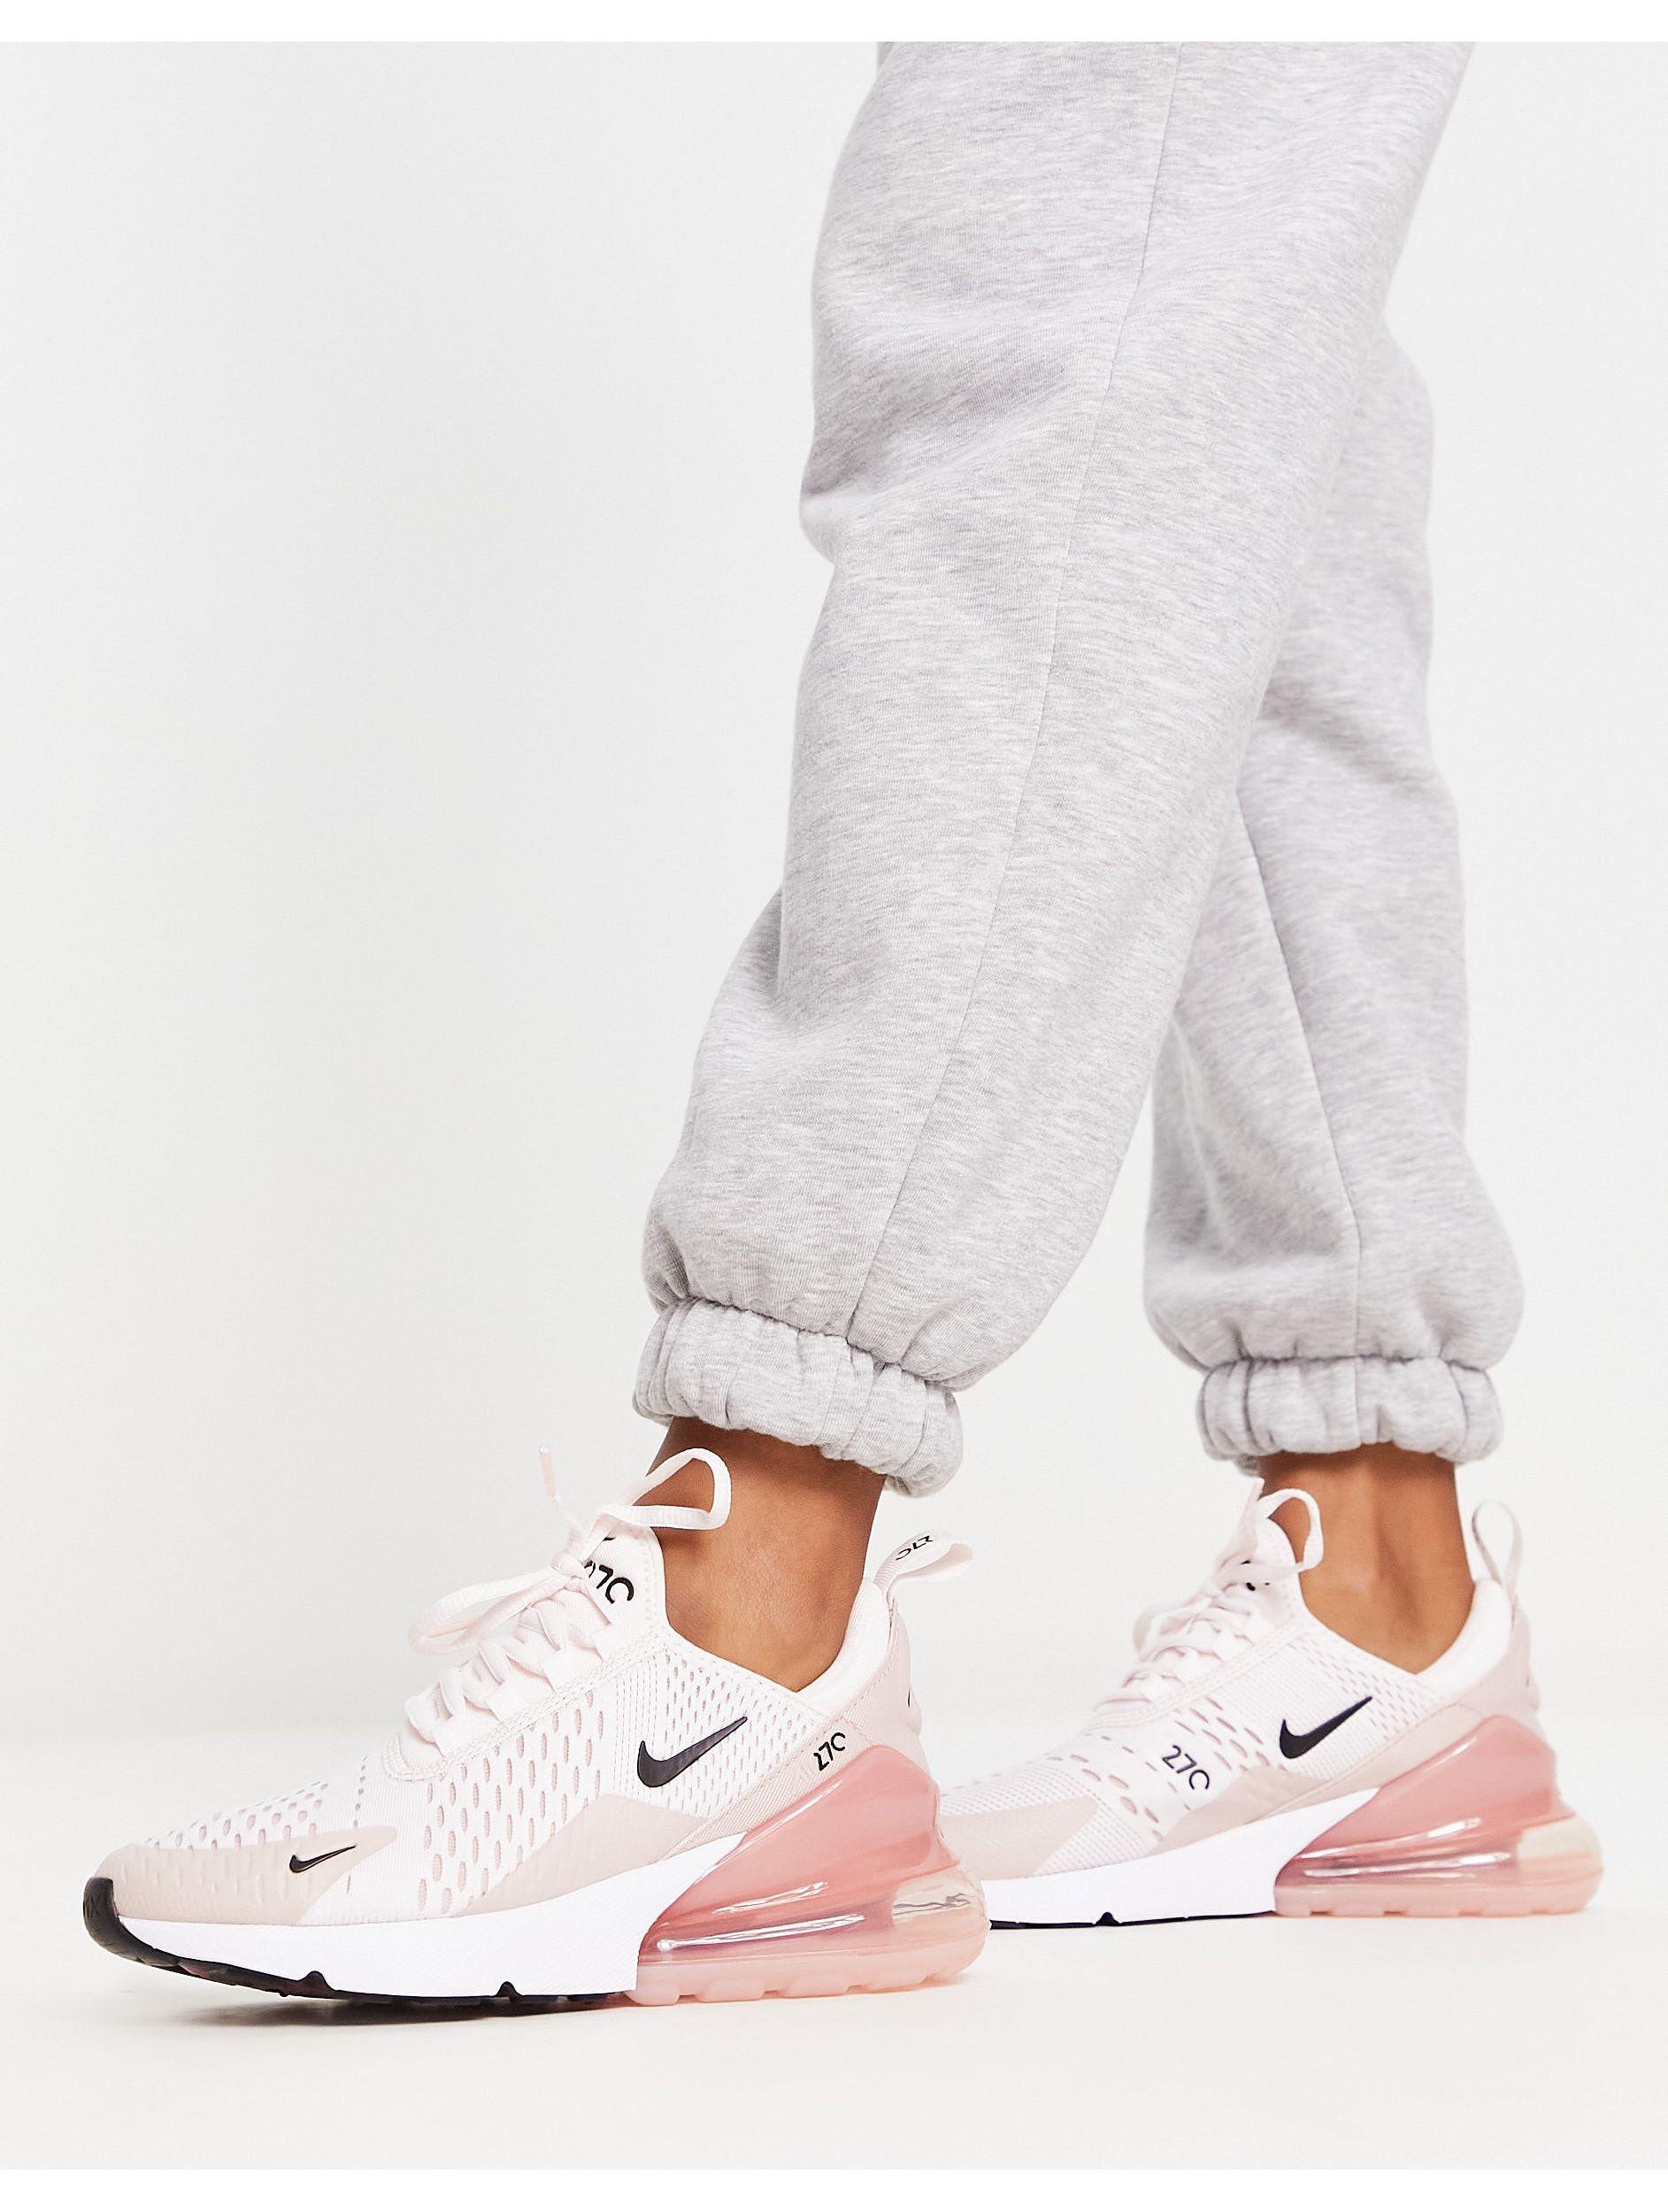 Nike Air Max 270 Sneakers in White | Lyst